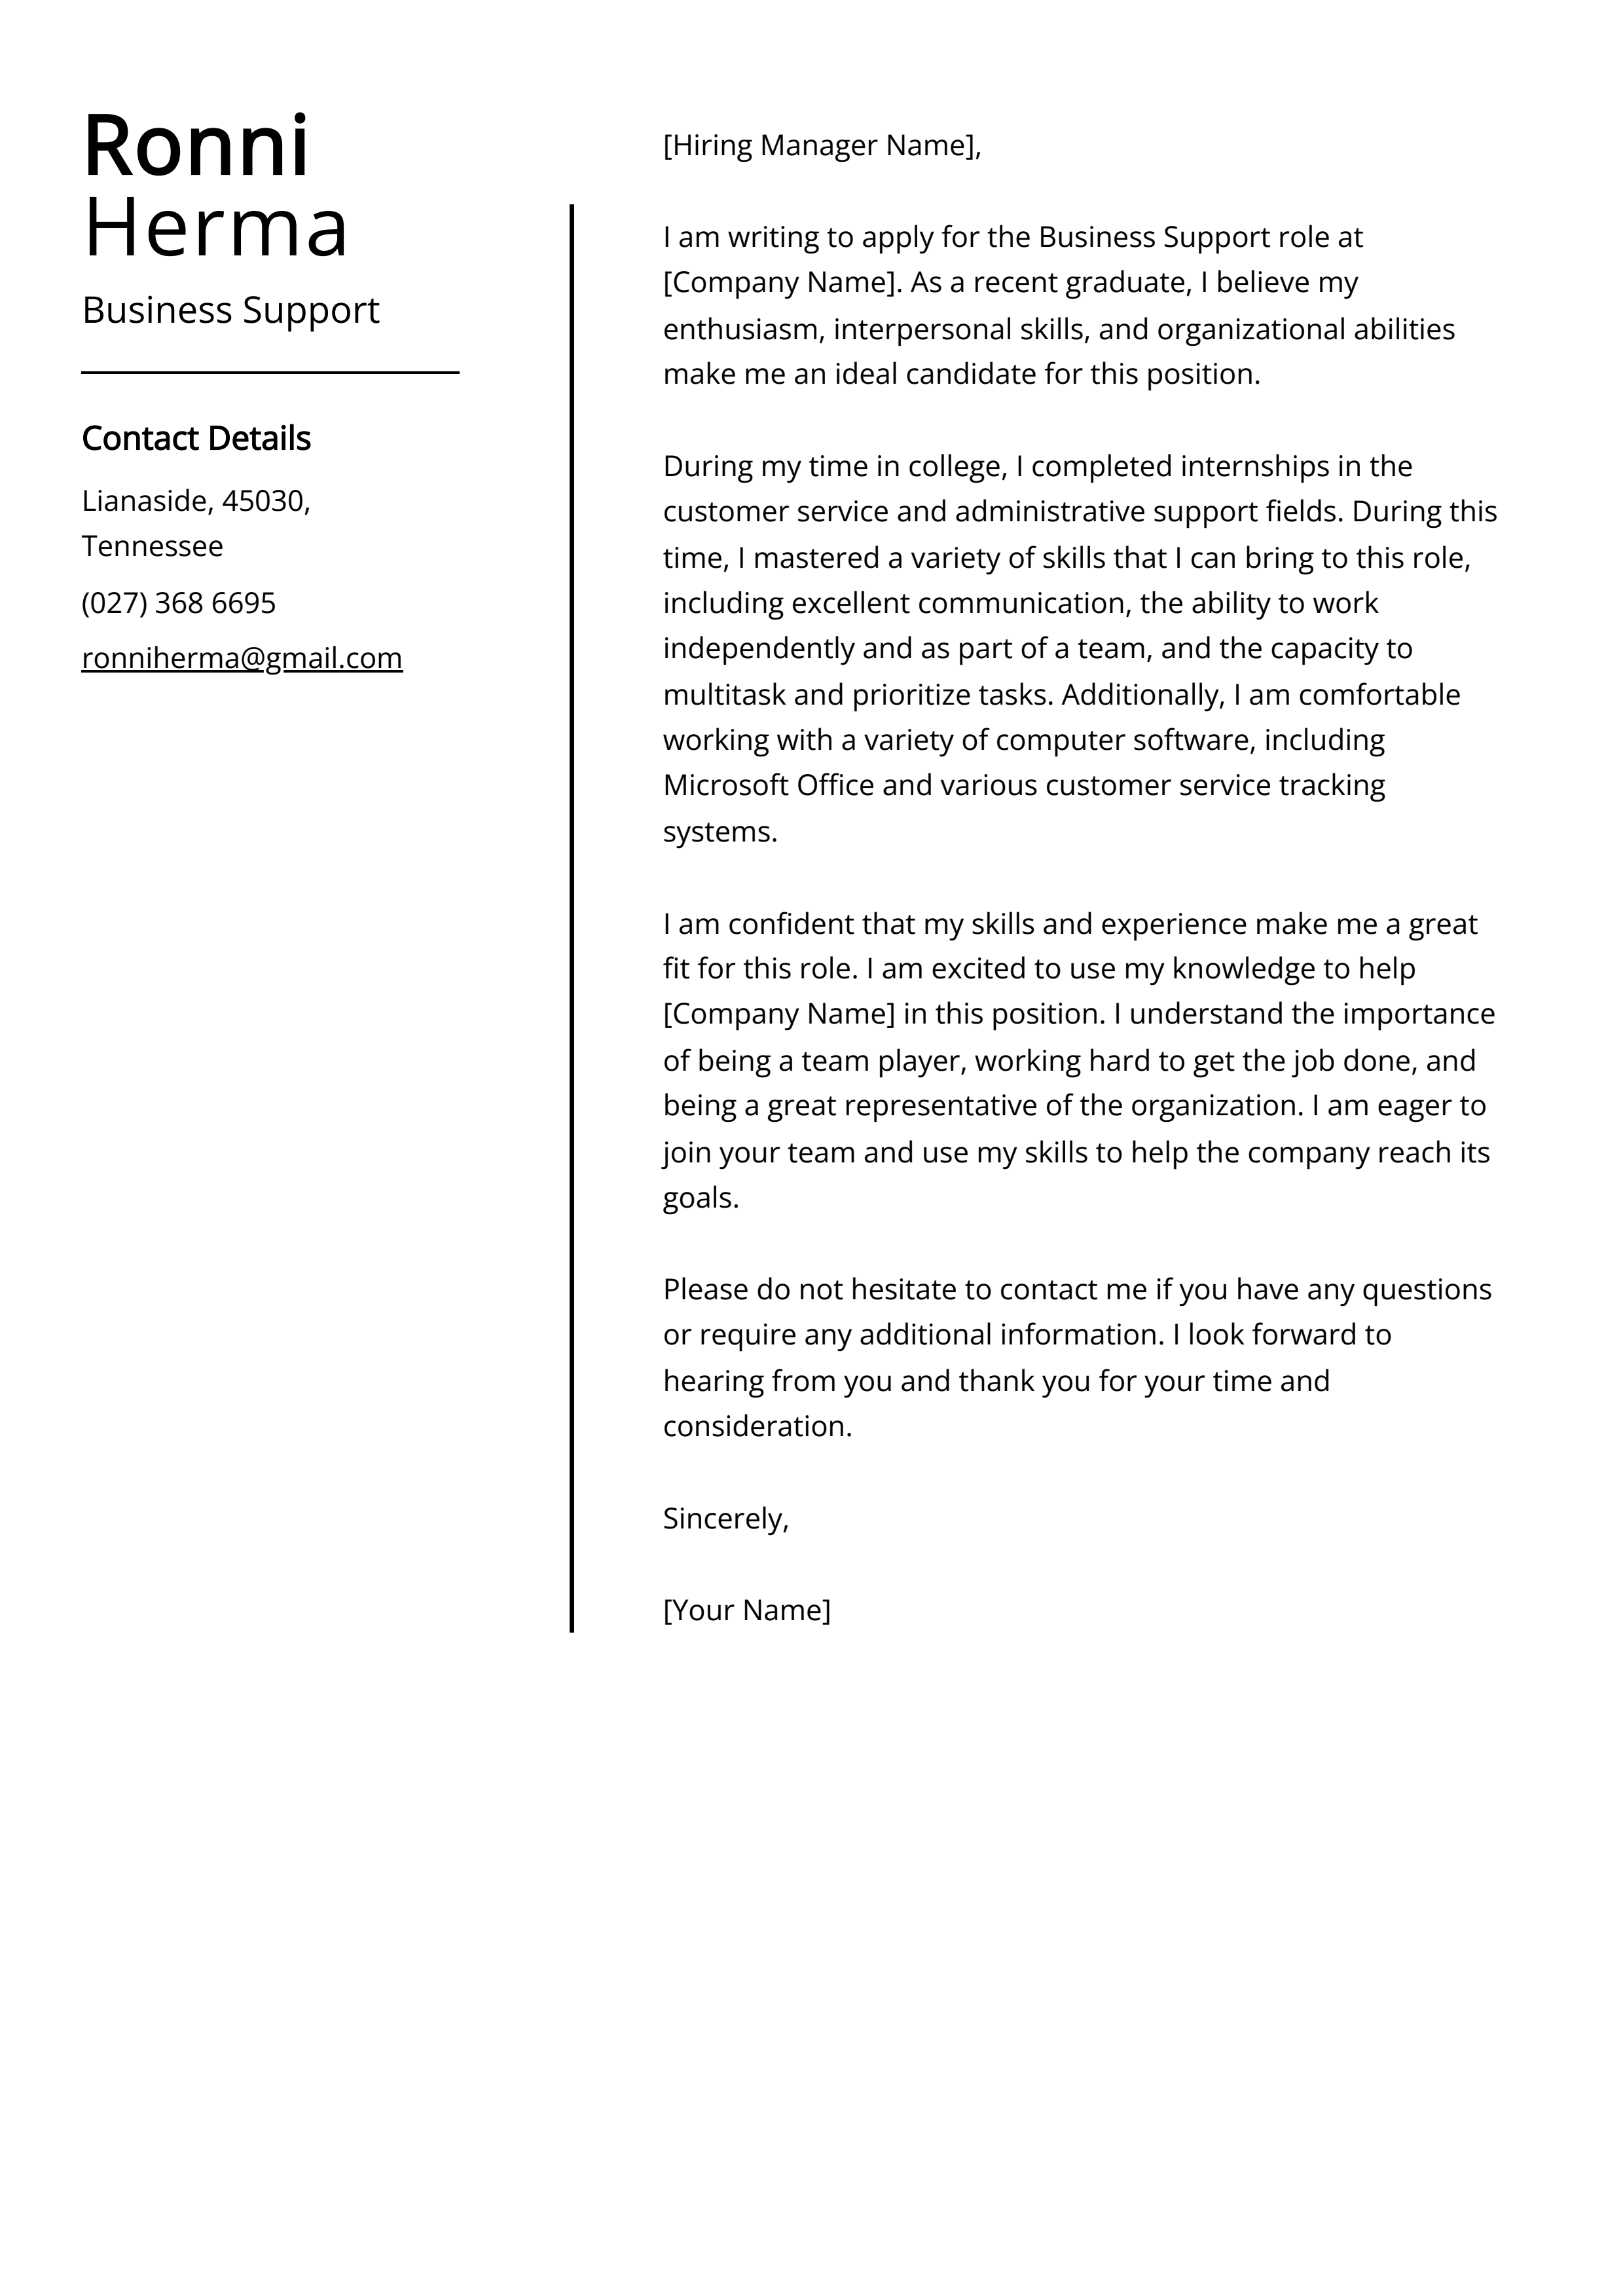 Business Support Cover Letter Example